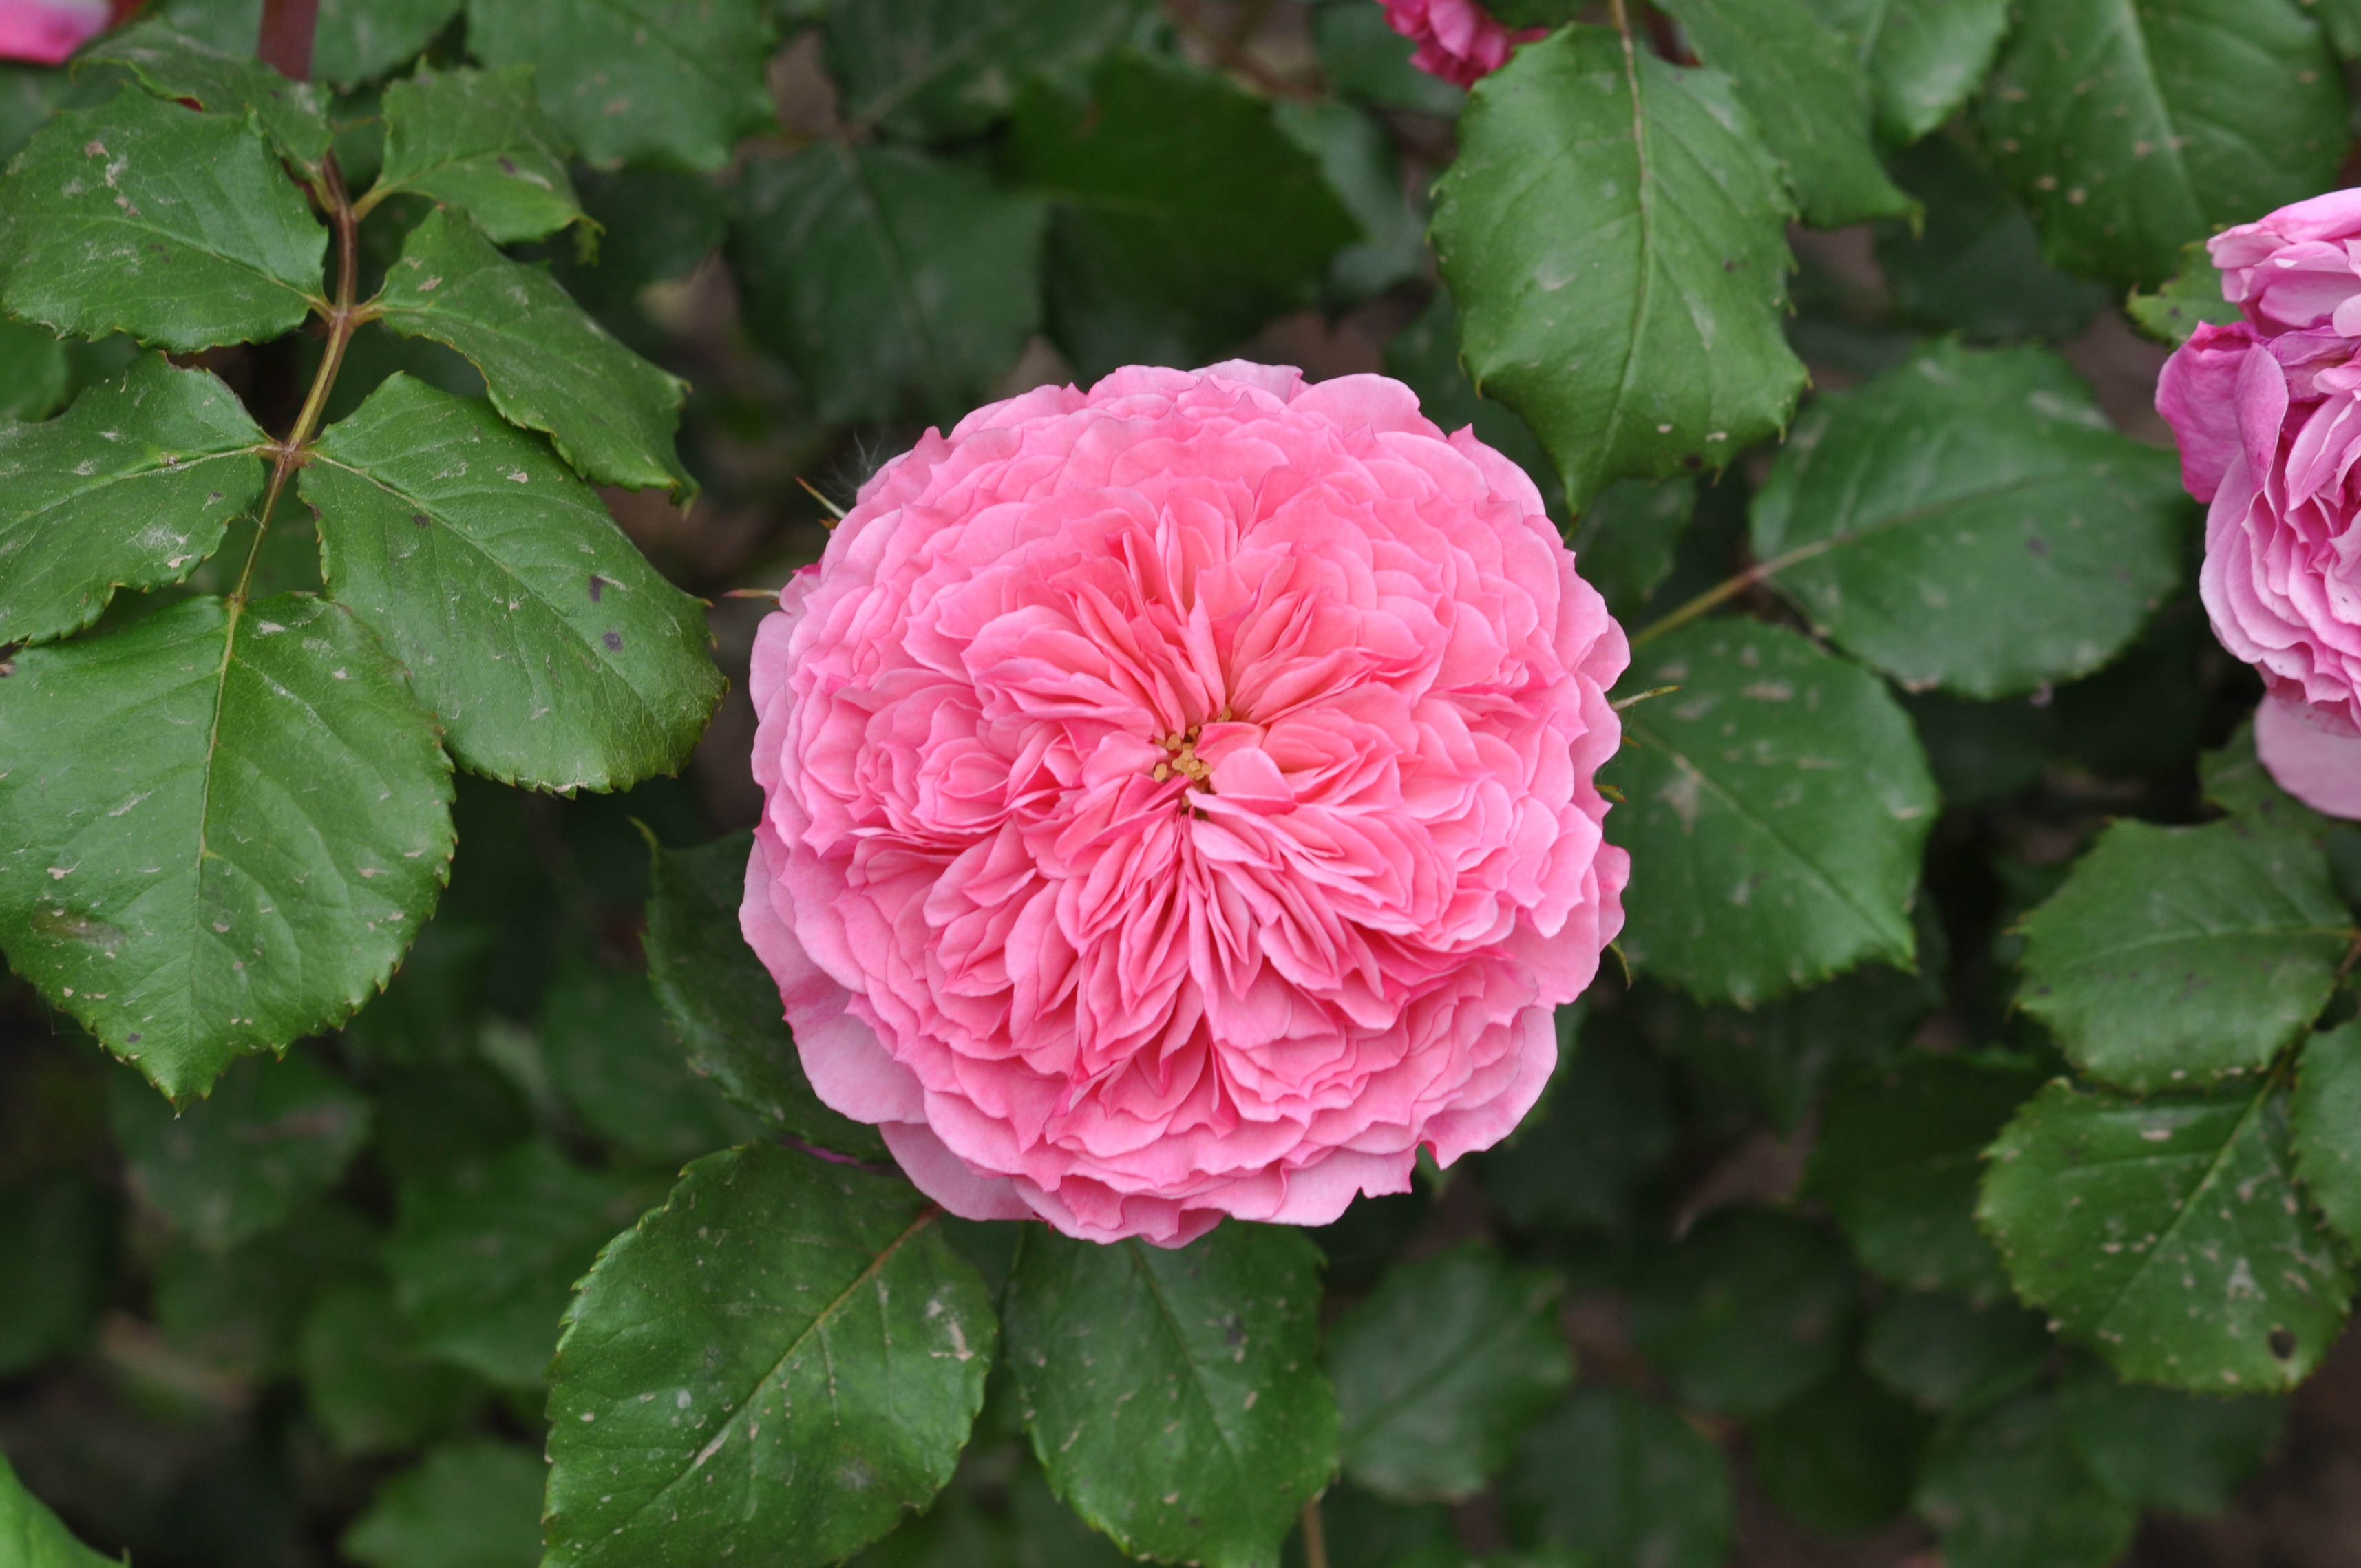 The pink edible rose flower of Rosa 'Theo Clevers' (Dobbies Garden Centres/PA)